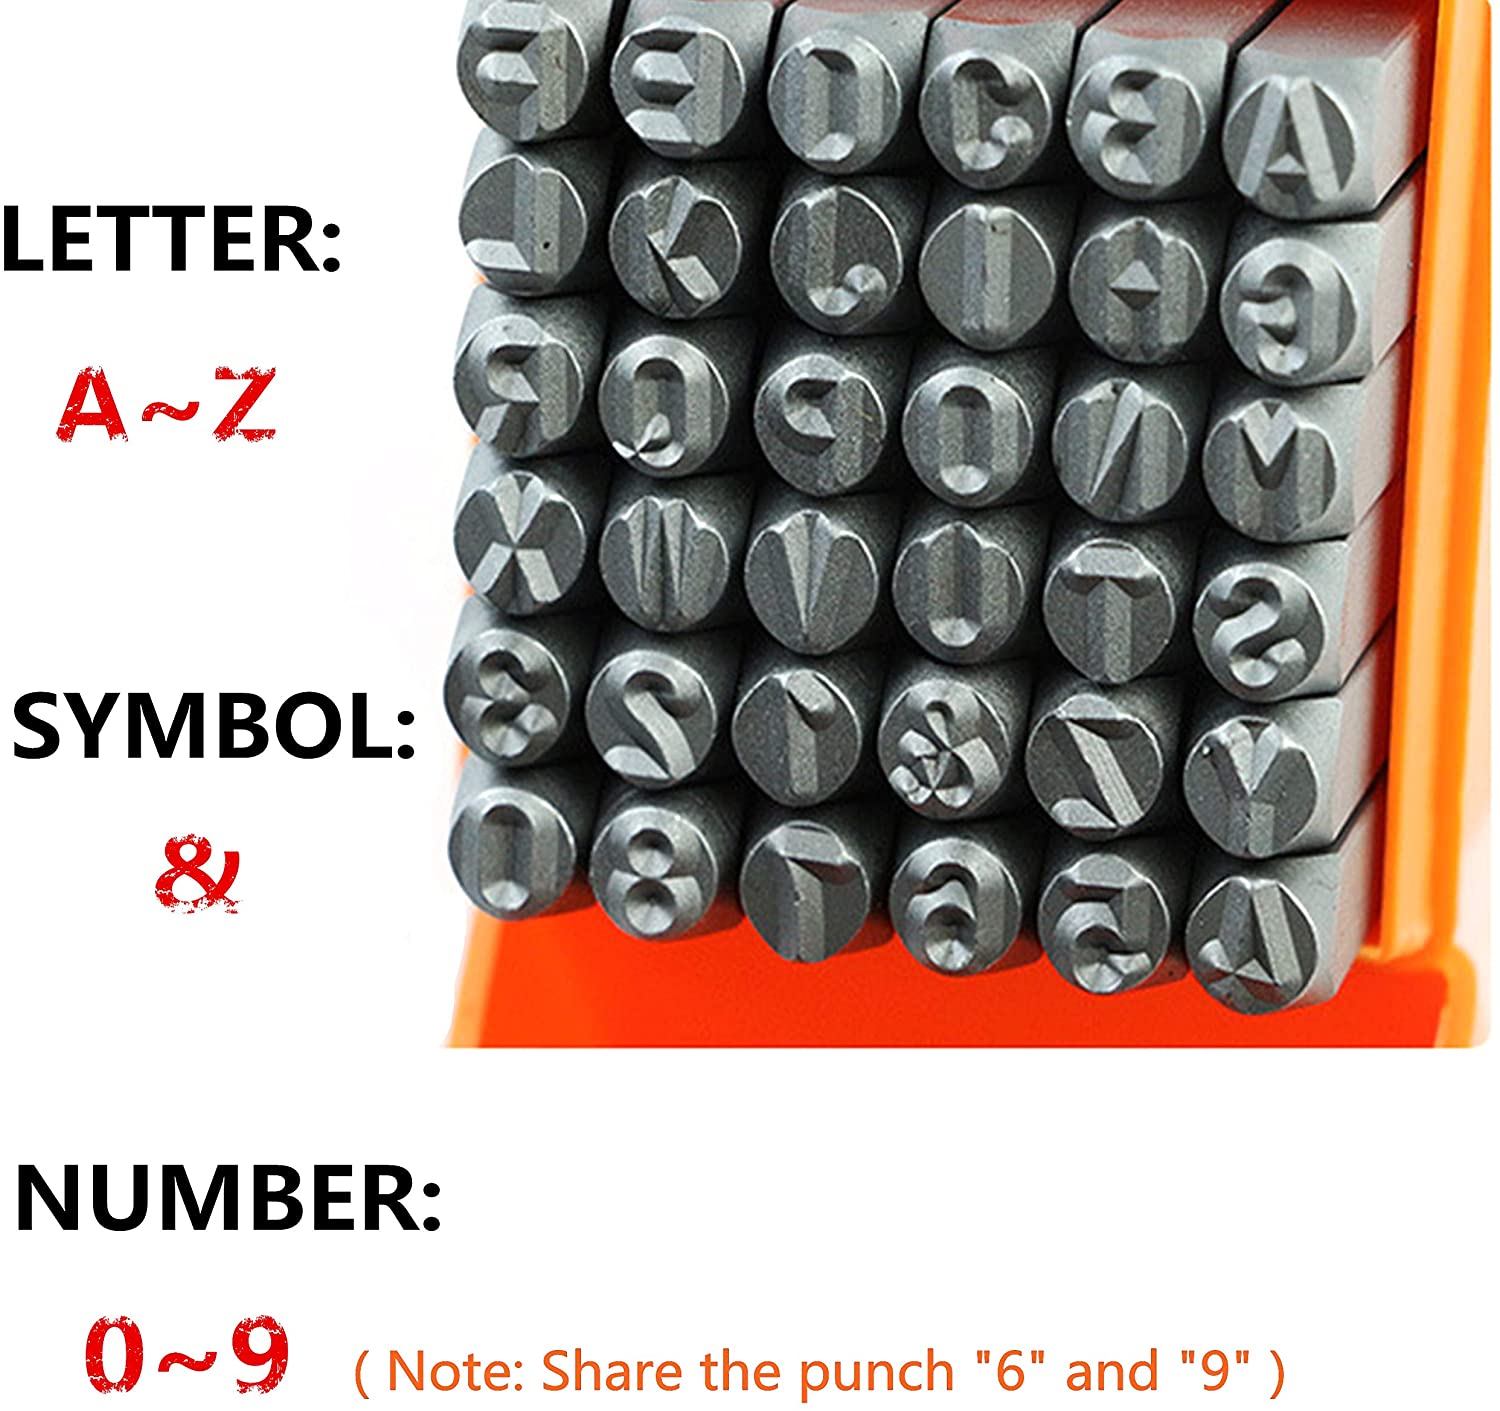 PARUU® 36 Piece Letter and Number Punch Set For Stamping Metal 2.5